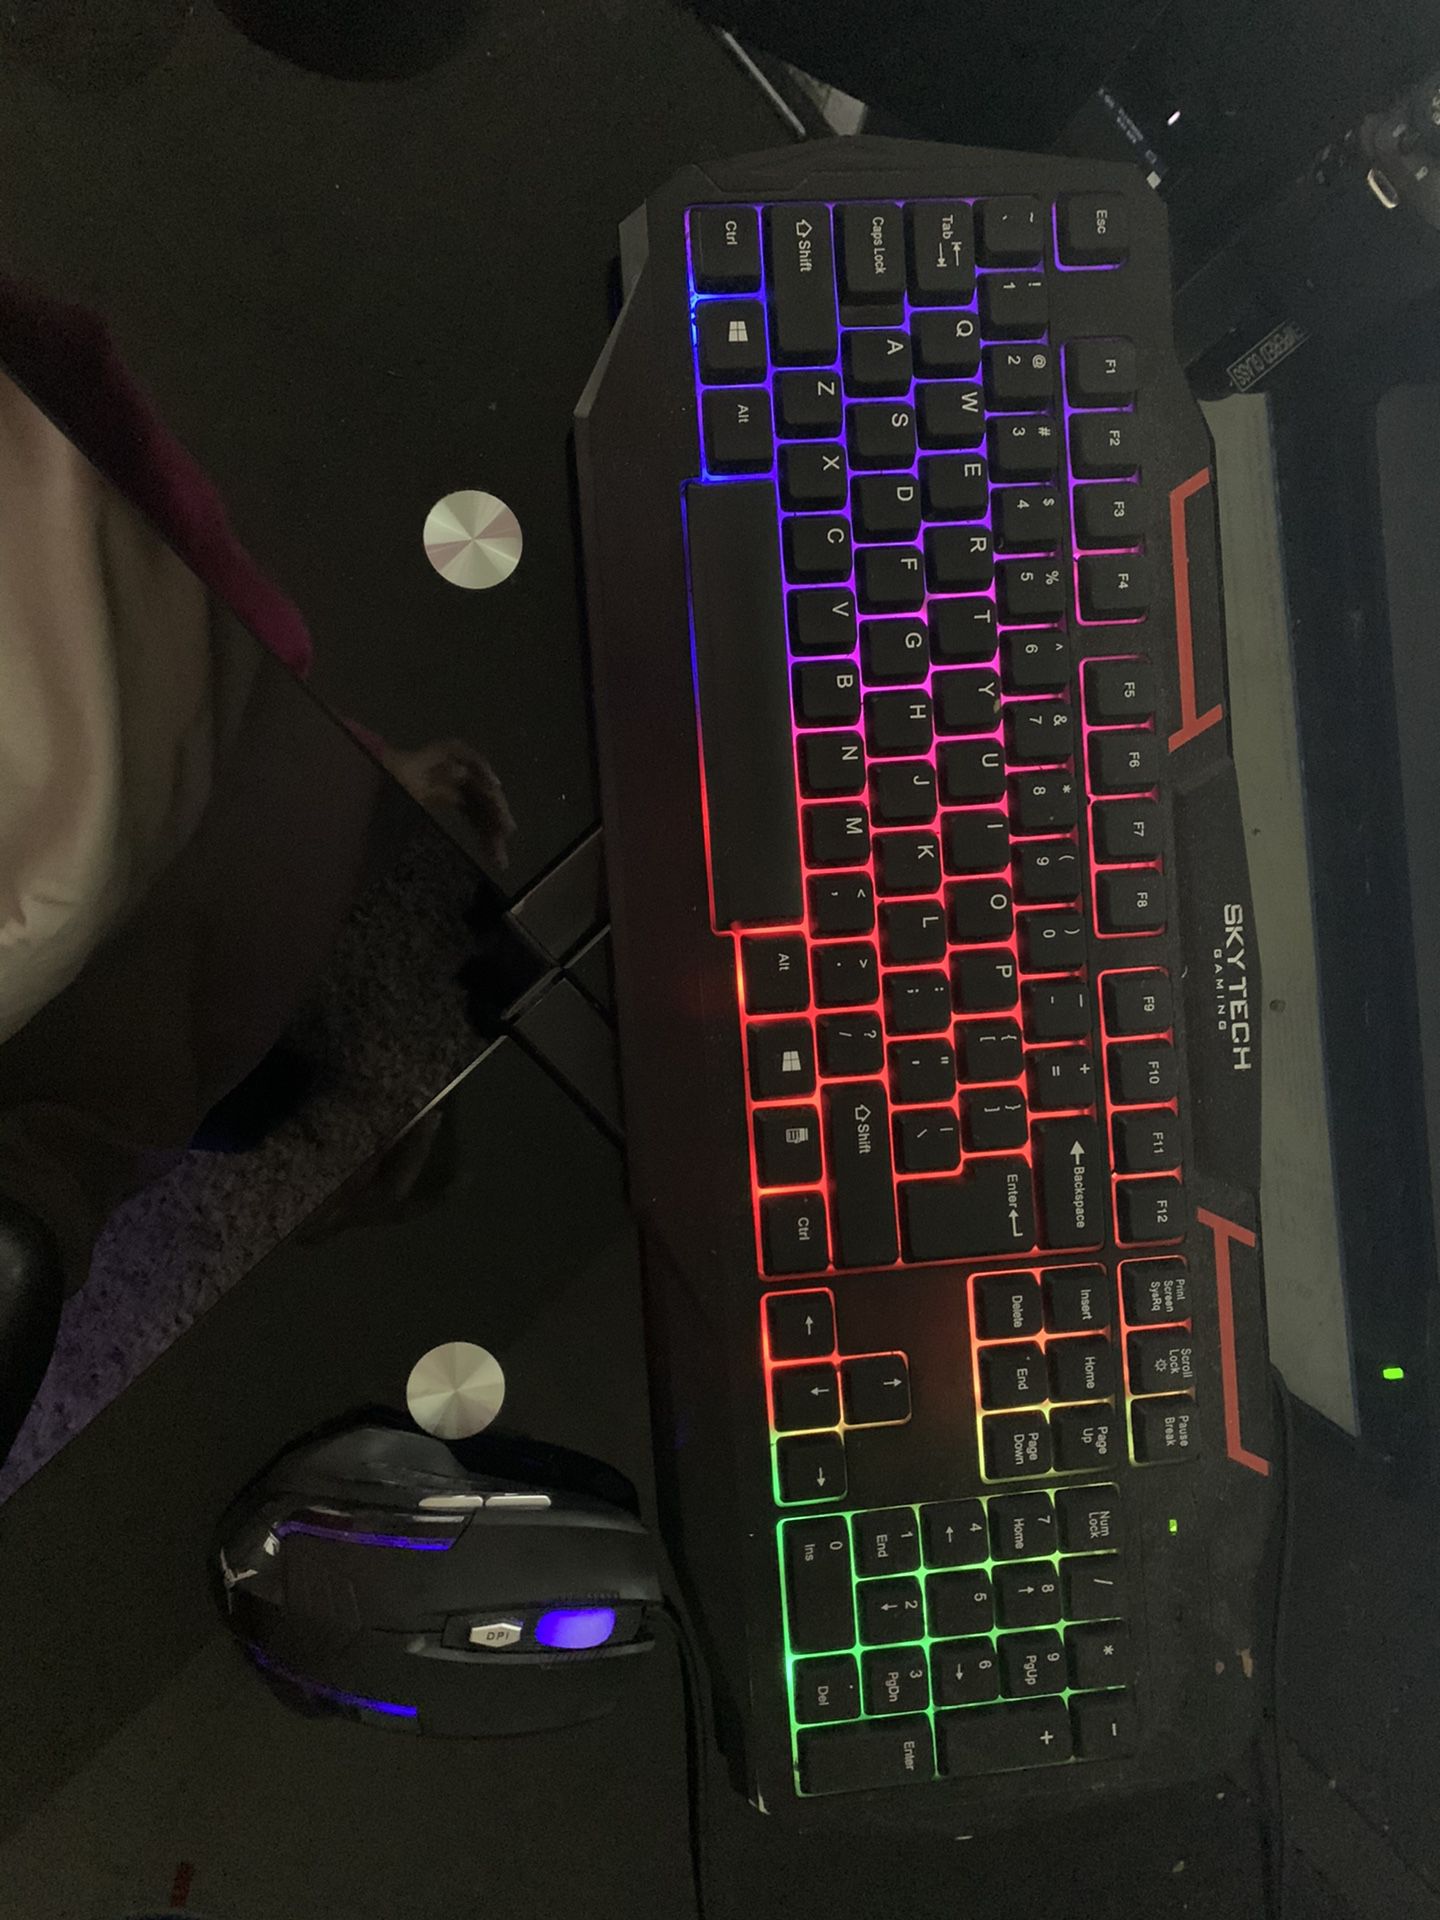 SkyTech rainbow led lights on keyboard and mouse